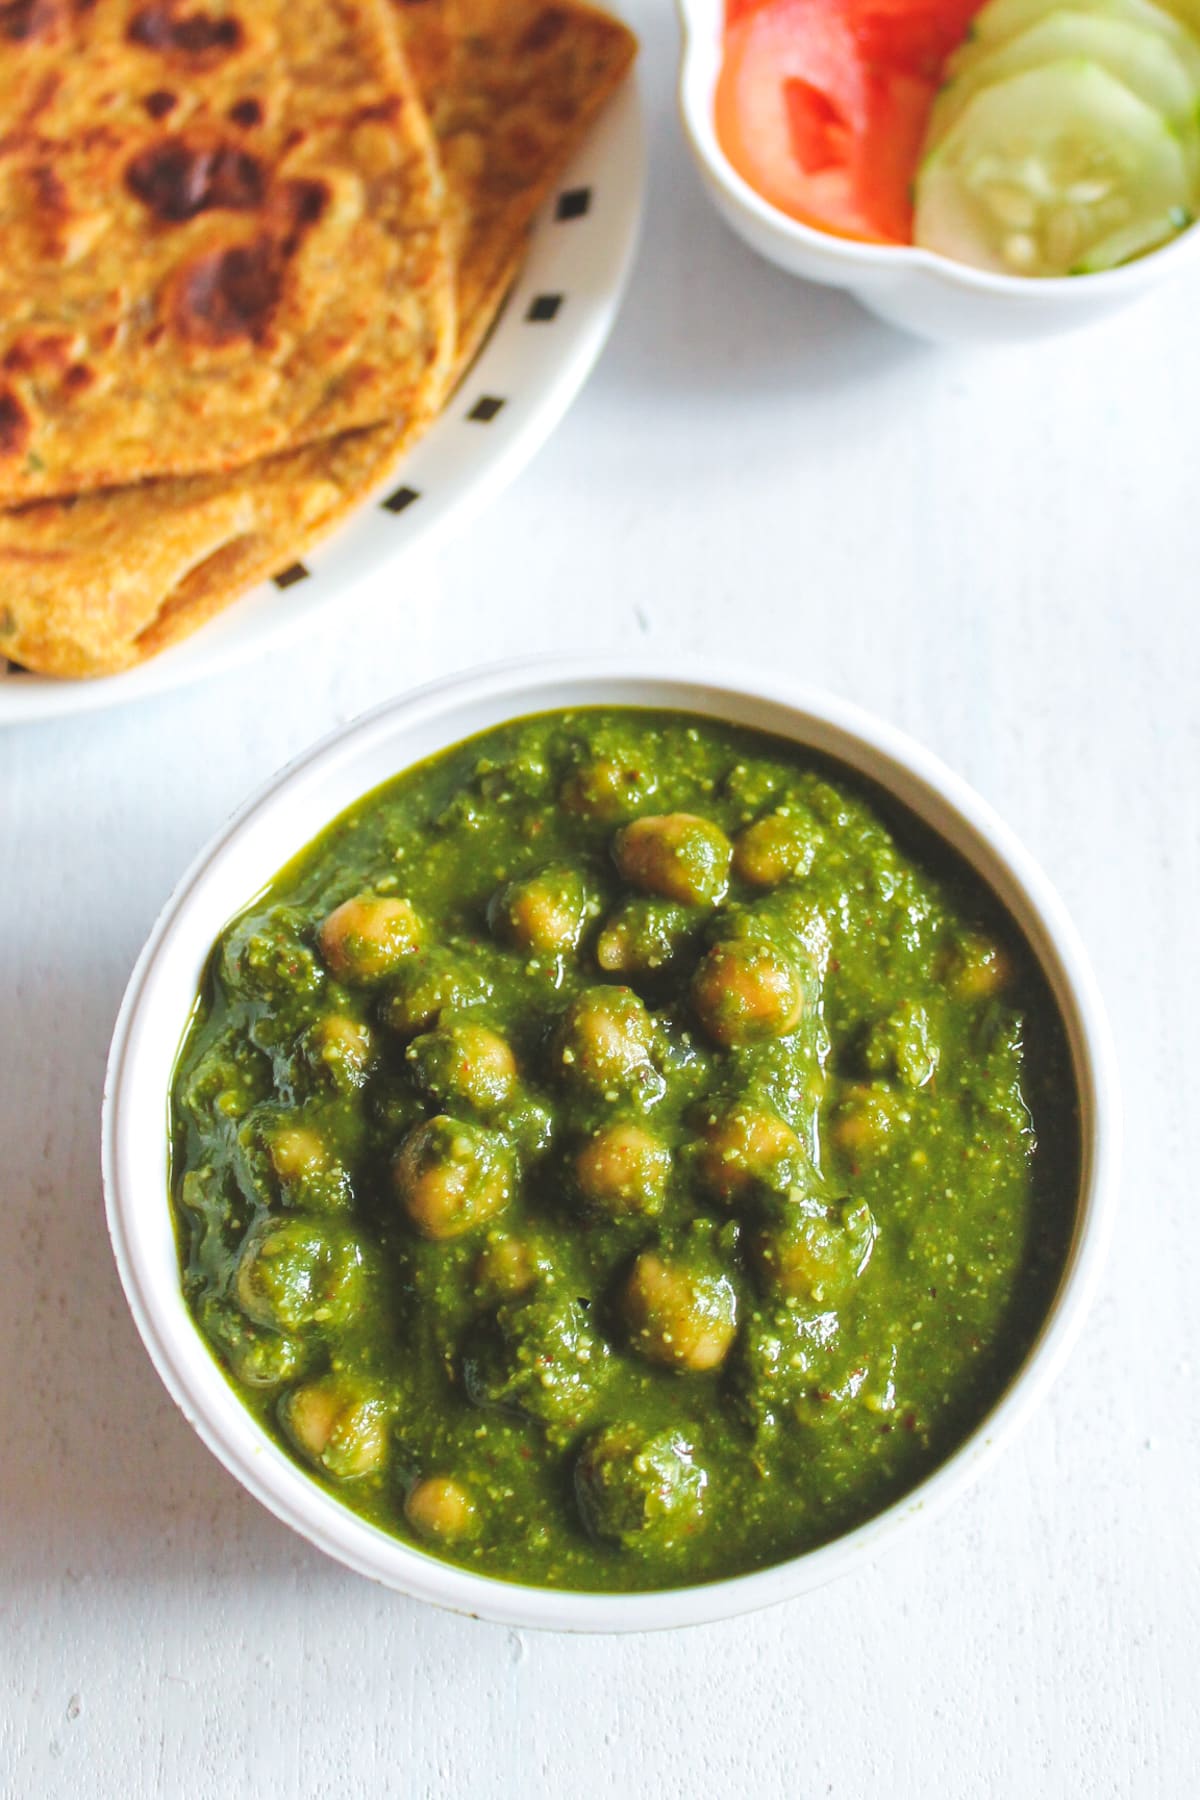 Chana palak bowl with paratha and cucumber, tomato in the back.